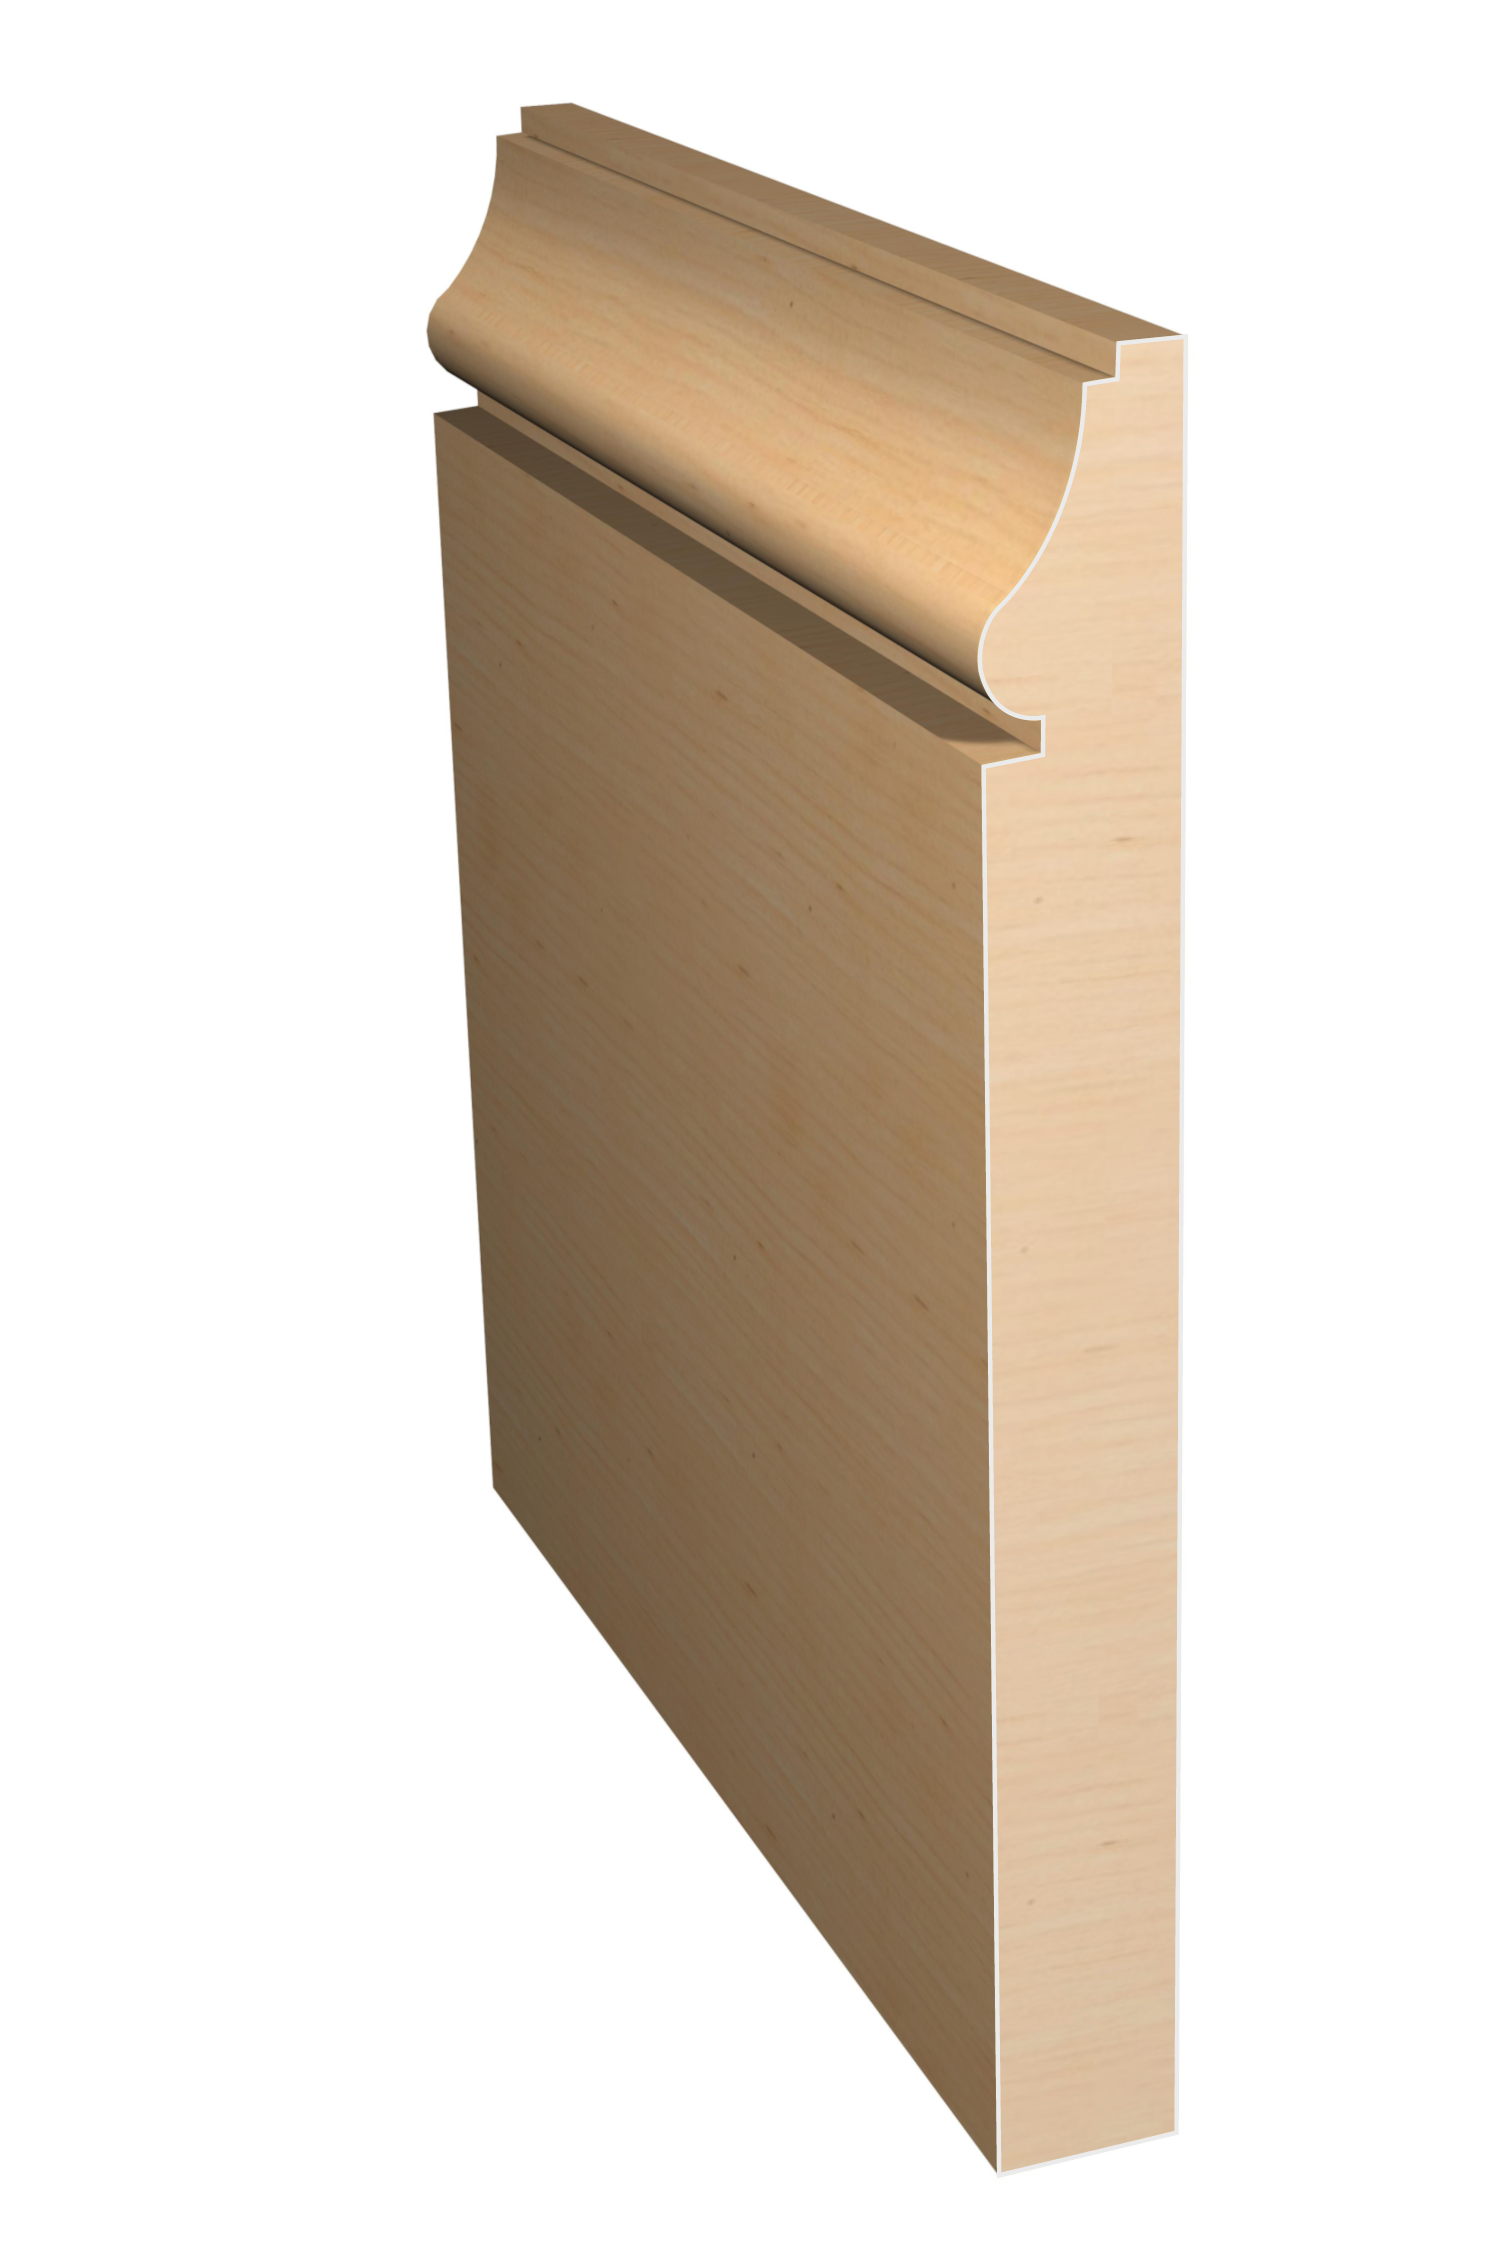 Three dimensional rendering of custom base wood molding BAPL73 made by Public Lumber Company in Detroit.